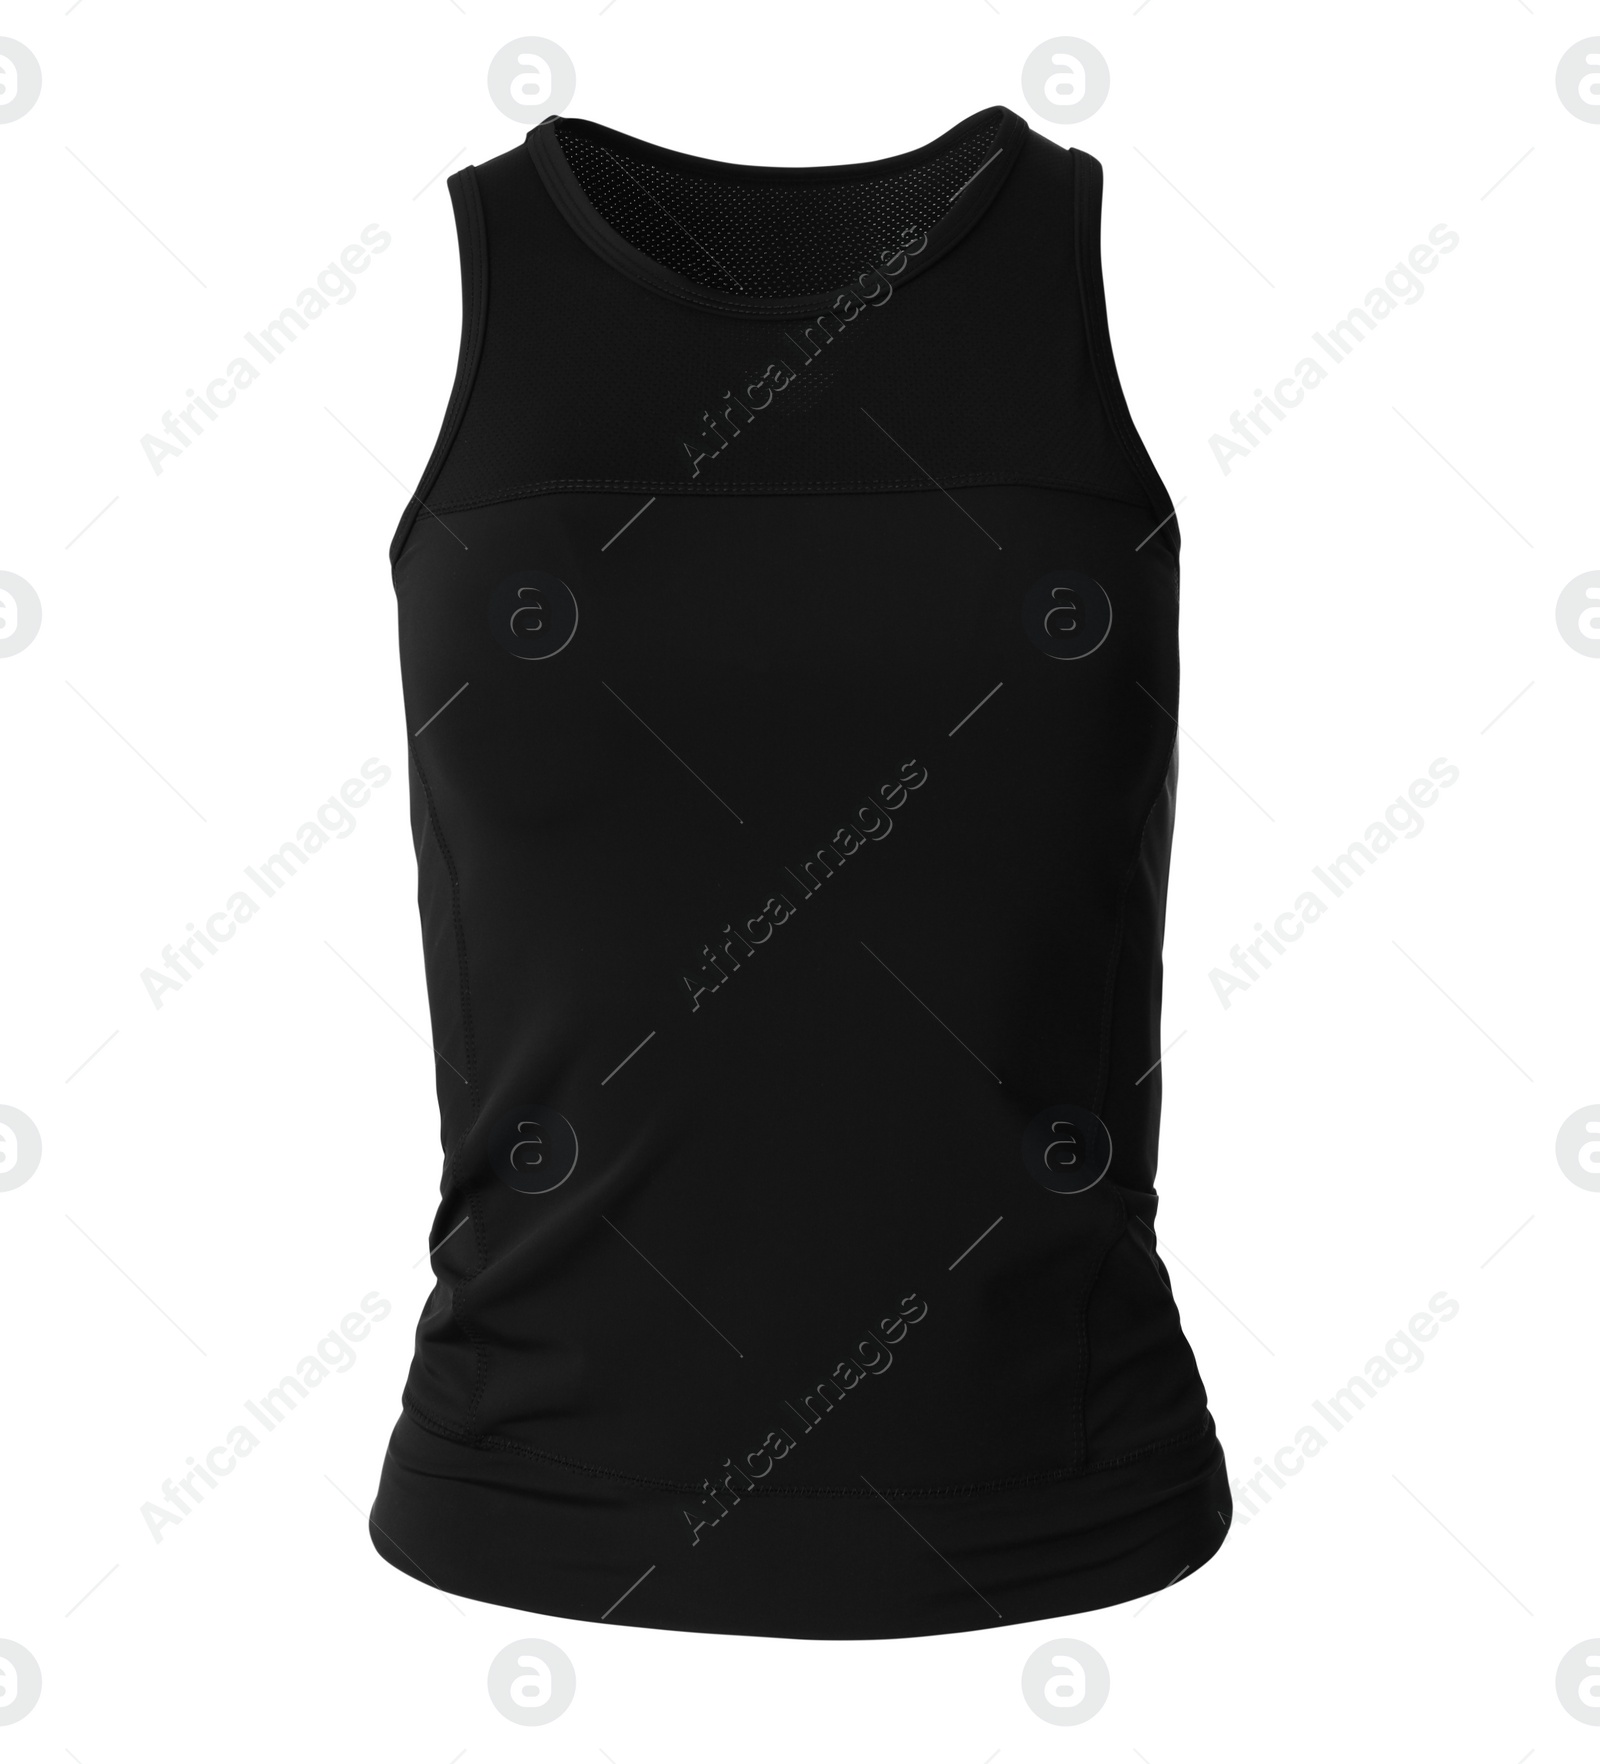 Photo of Black women's top isolated on white. Sports clothing